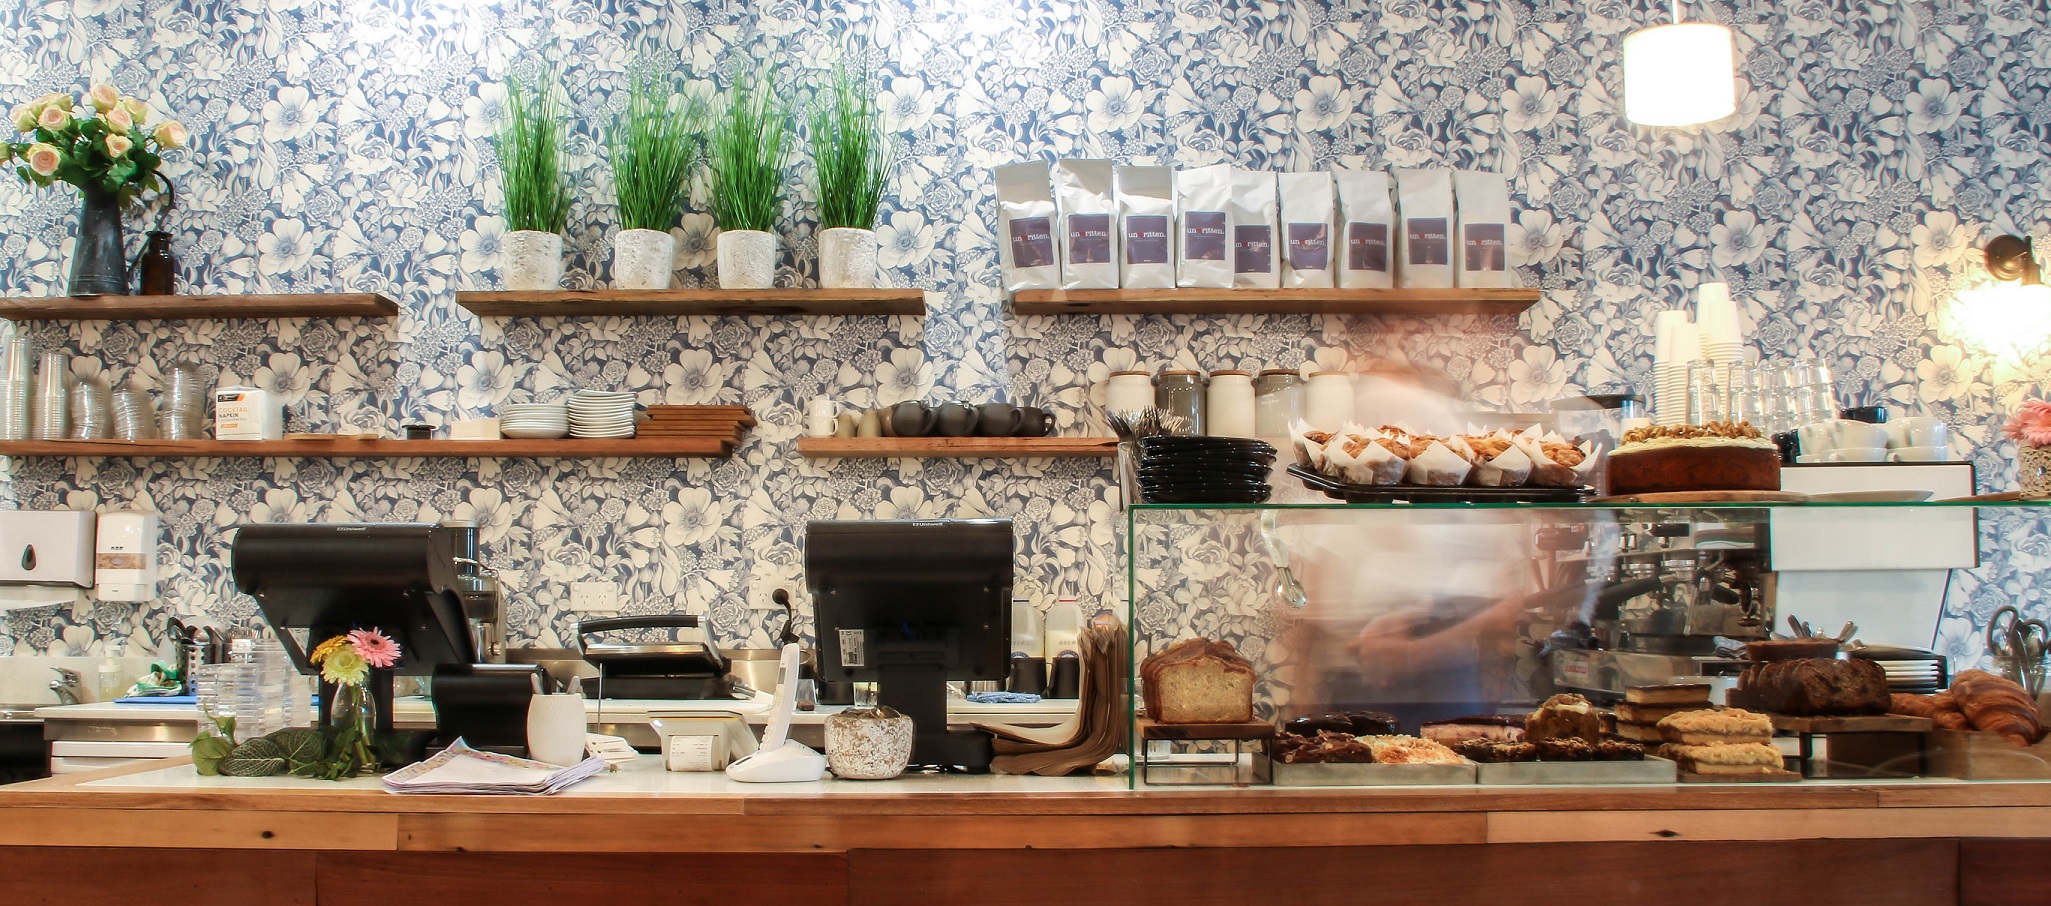 Uniwell touchscreen POS systems for bakeries bakery cafe #uniquelyuniwell